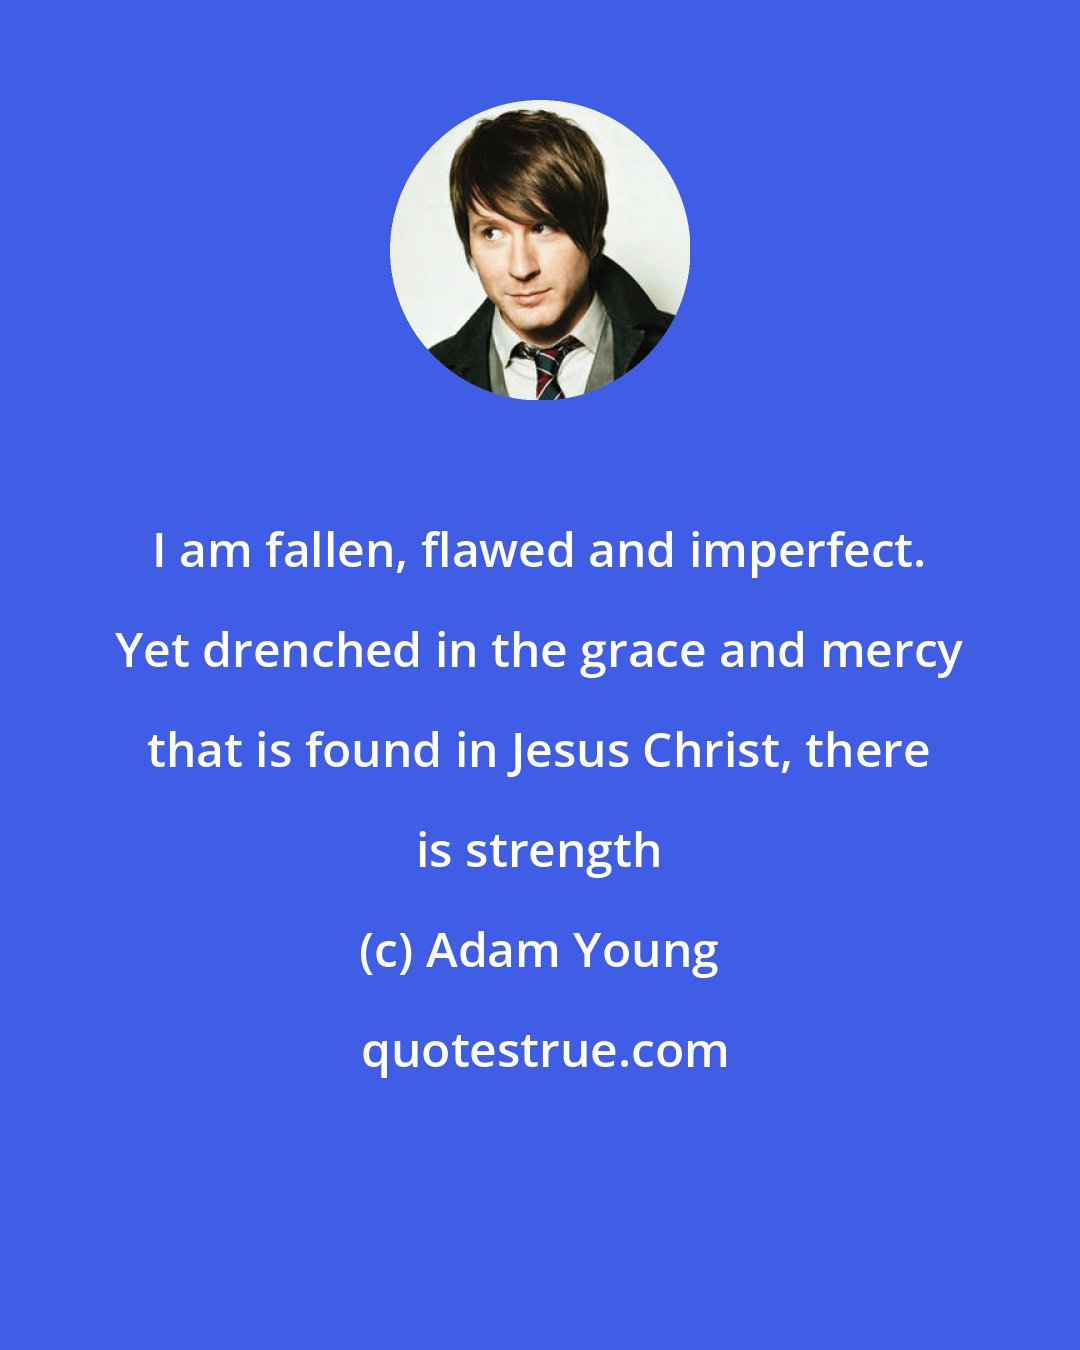 Adam Young: I am fallen, flawed and imperfect. Yet drenched in the grace and mercy that is found in Jesus Christ, there is strength